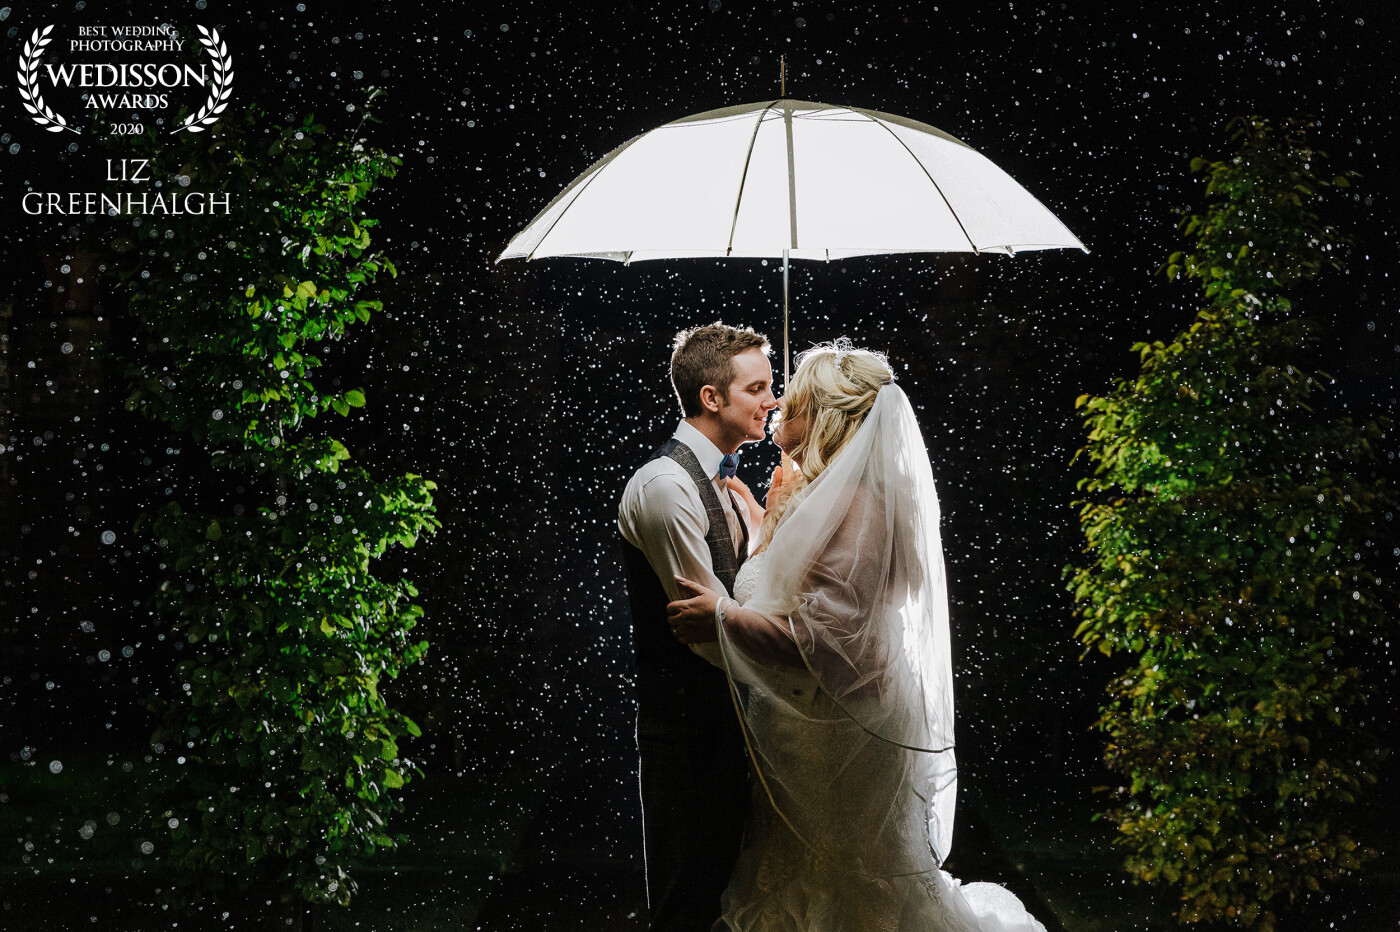 Rain isn't what you want on your wedding day but it can certainly add some amazing photos to end the day. Eilish and Brendan loved heading out with Umbrellas to finish off the night at the Old Hall Ely. Just perfect!